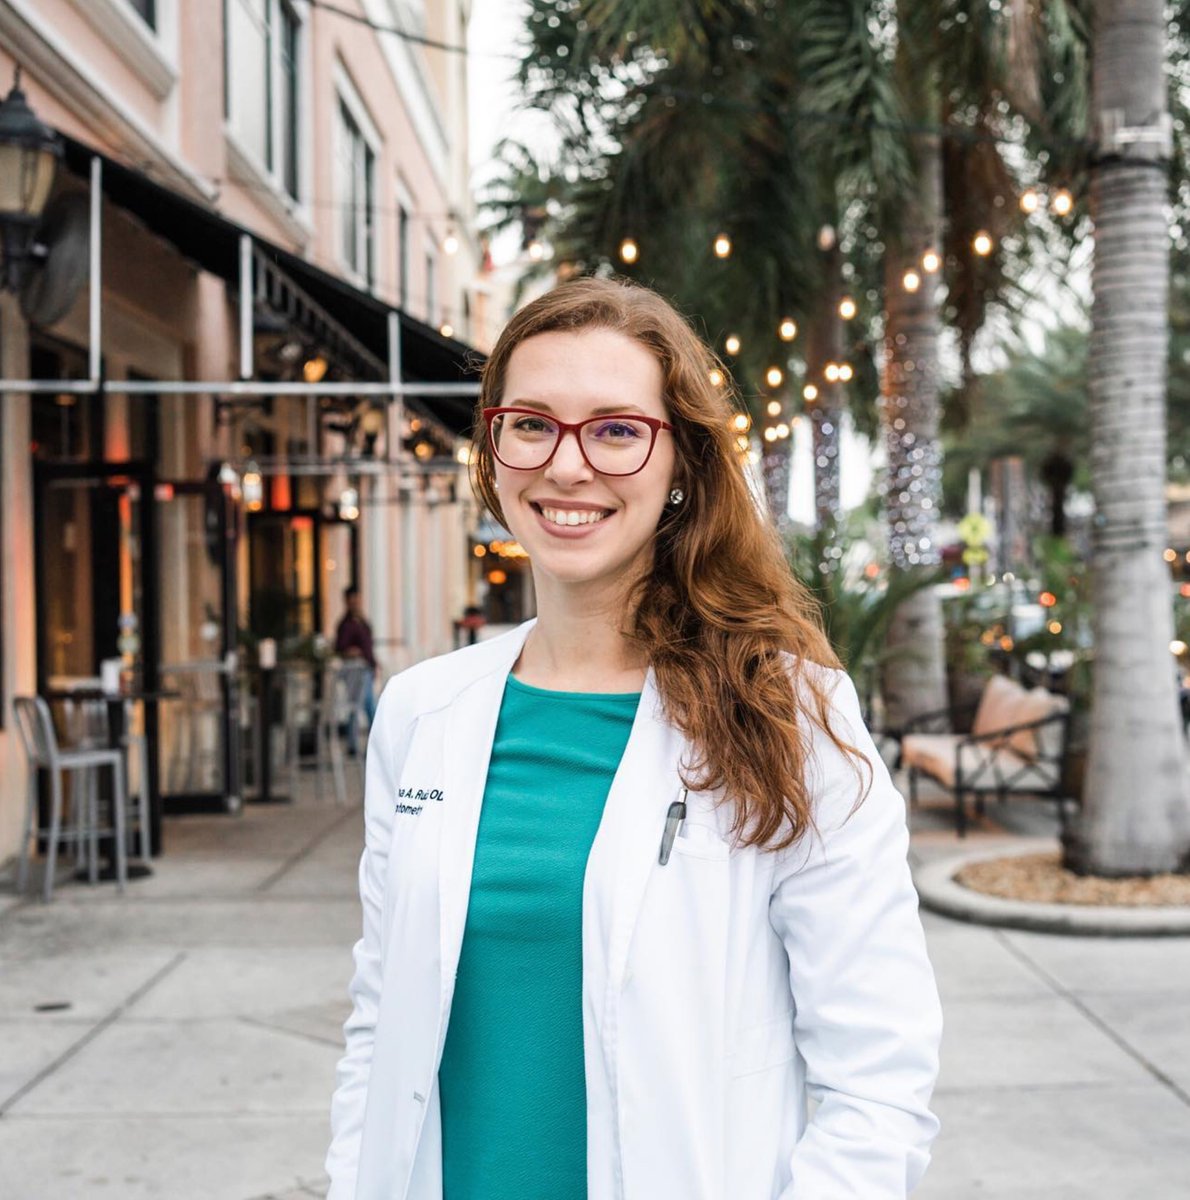 Meet our team! Doctor Ruiz performs eye exams and helps our customers preserve their vision by assisting them in finding the right prescription #eyesforward
#glasses #miami #soflo #eyewear #premiumeyewear #eyehealth #qualityservice #optical #optician #prescriptionglasses #eyeexam